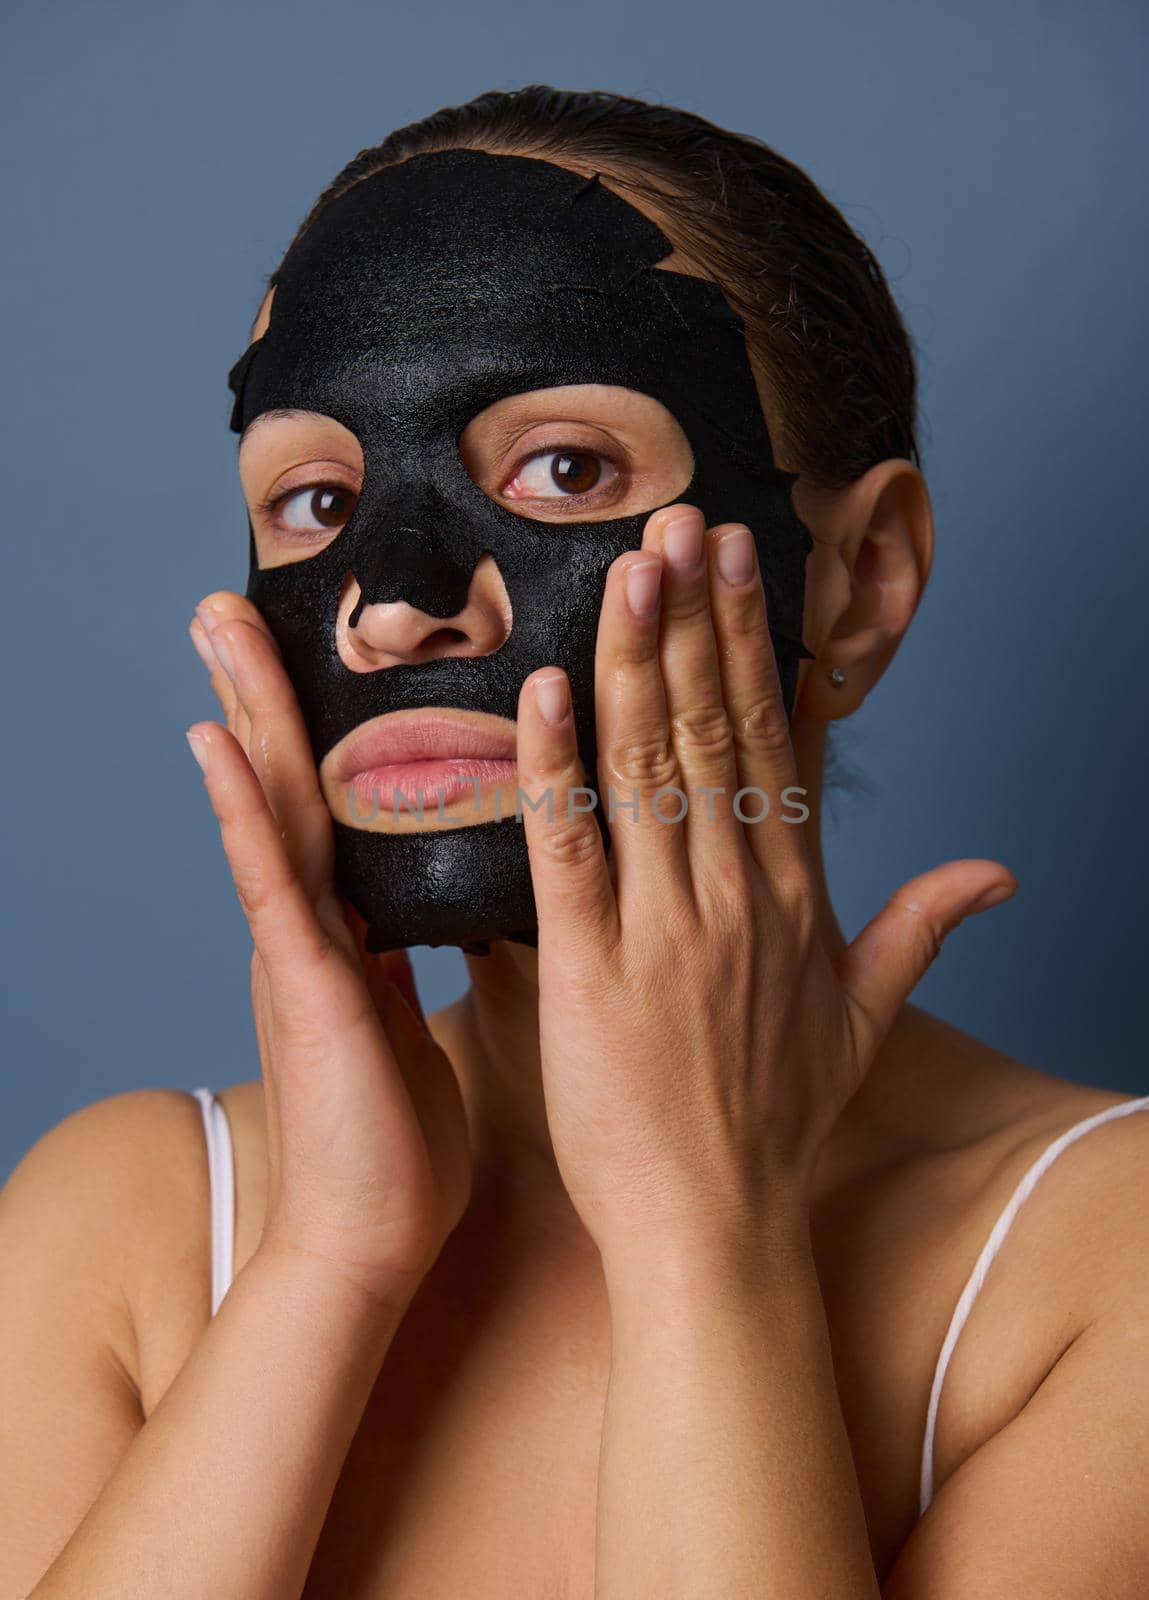 Close-up portrait of beautiful woman looking at the camera while putting on a nourishing smoothing moisturizing black face mask taking care of the beauty of her skin. Isolated on blue-gray background by artgf